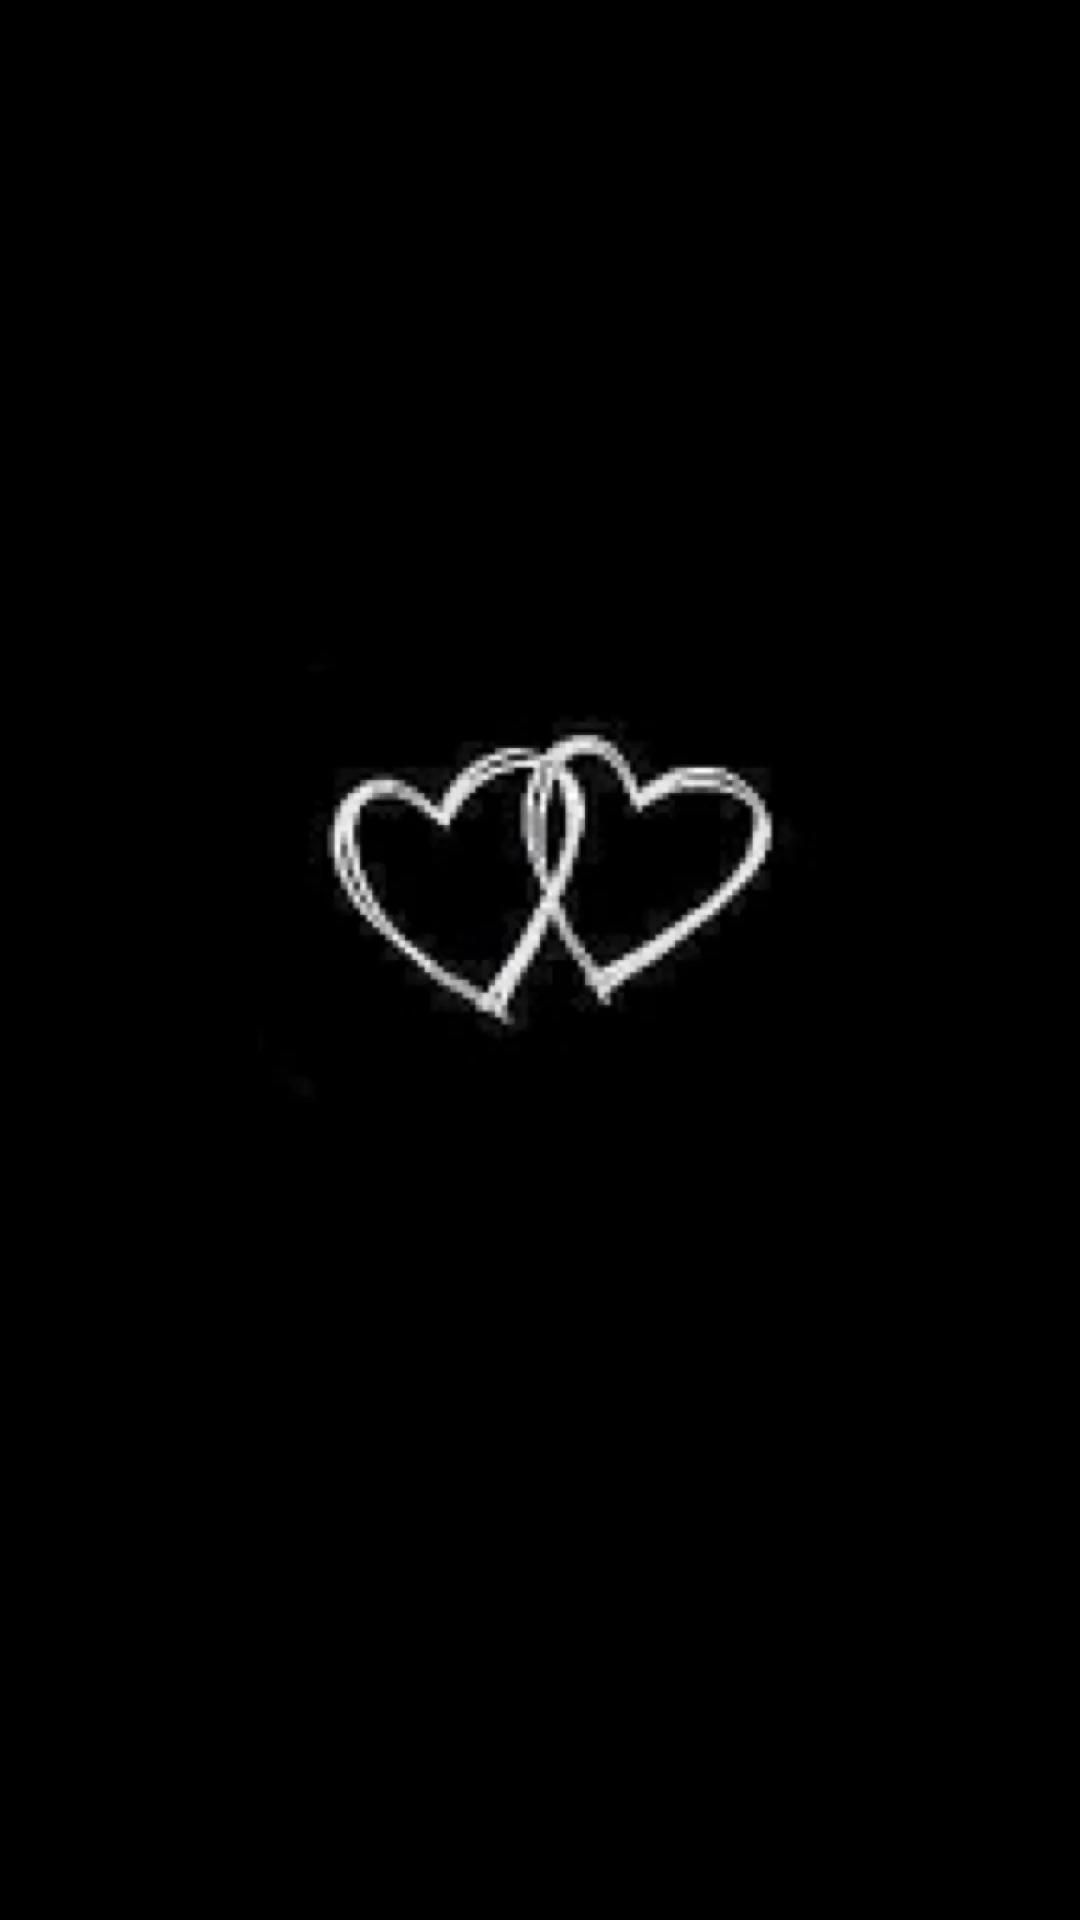 Two hearts intertwined on a black background - Black heart